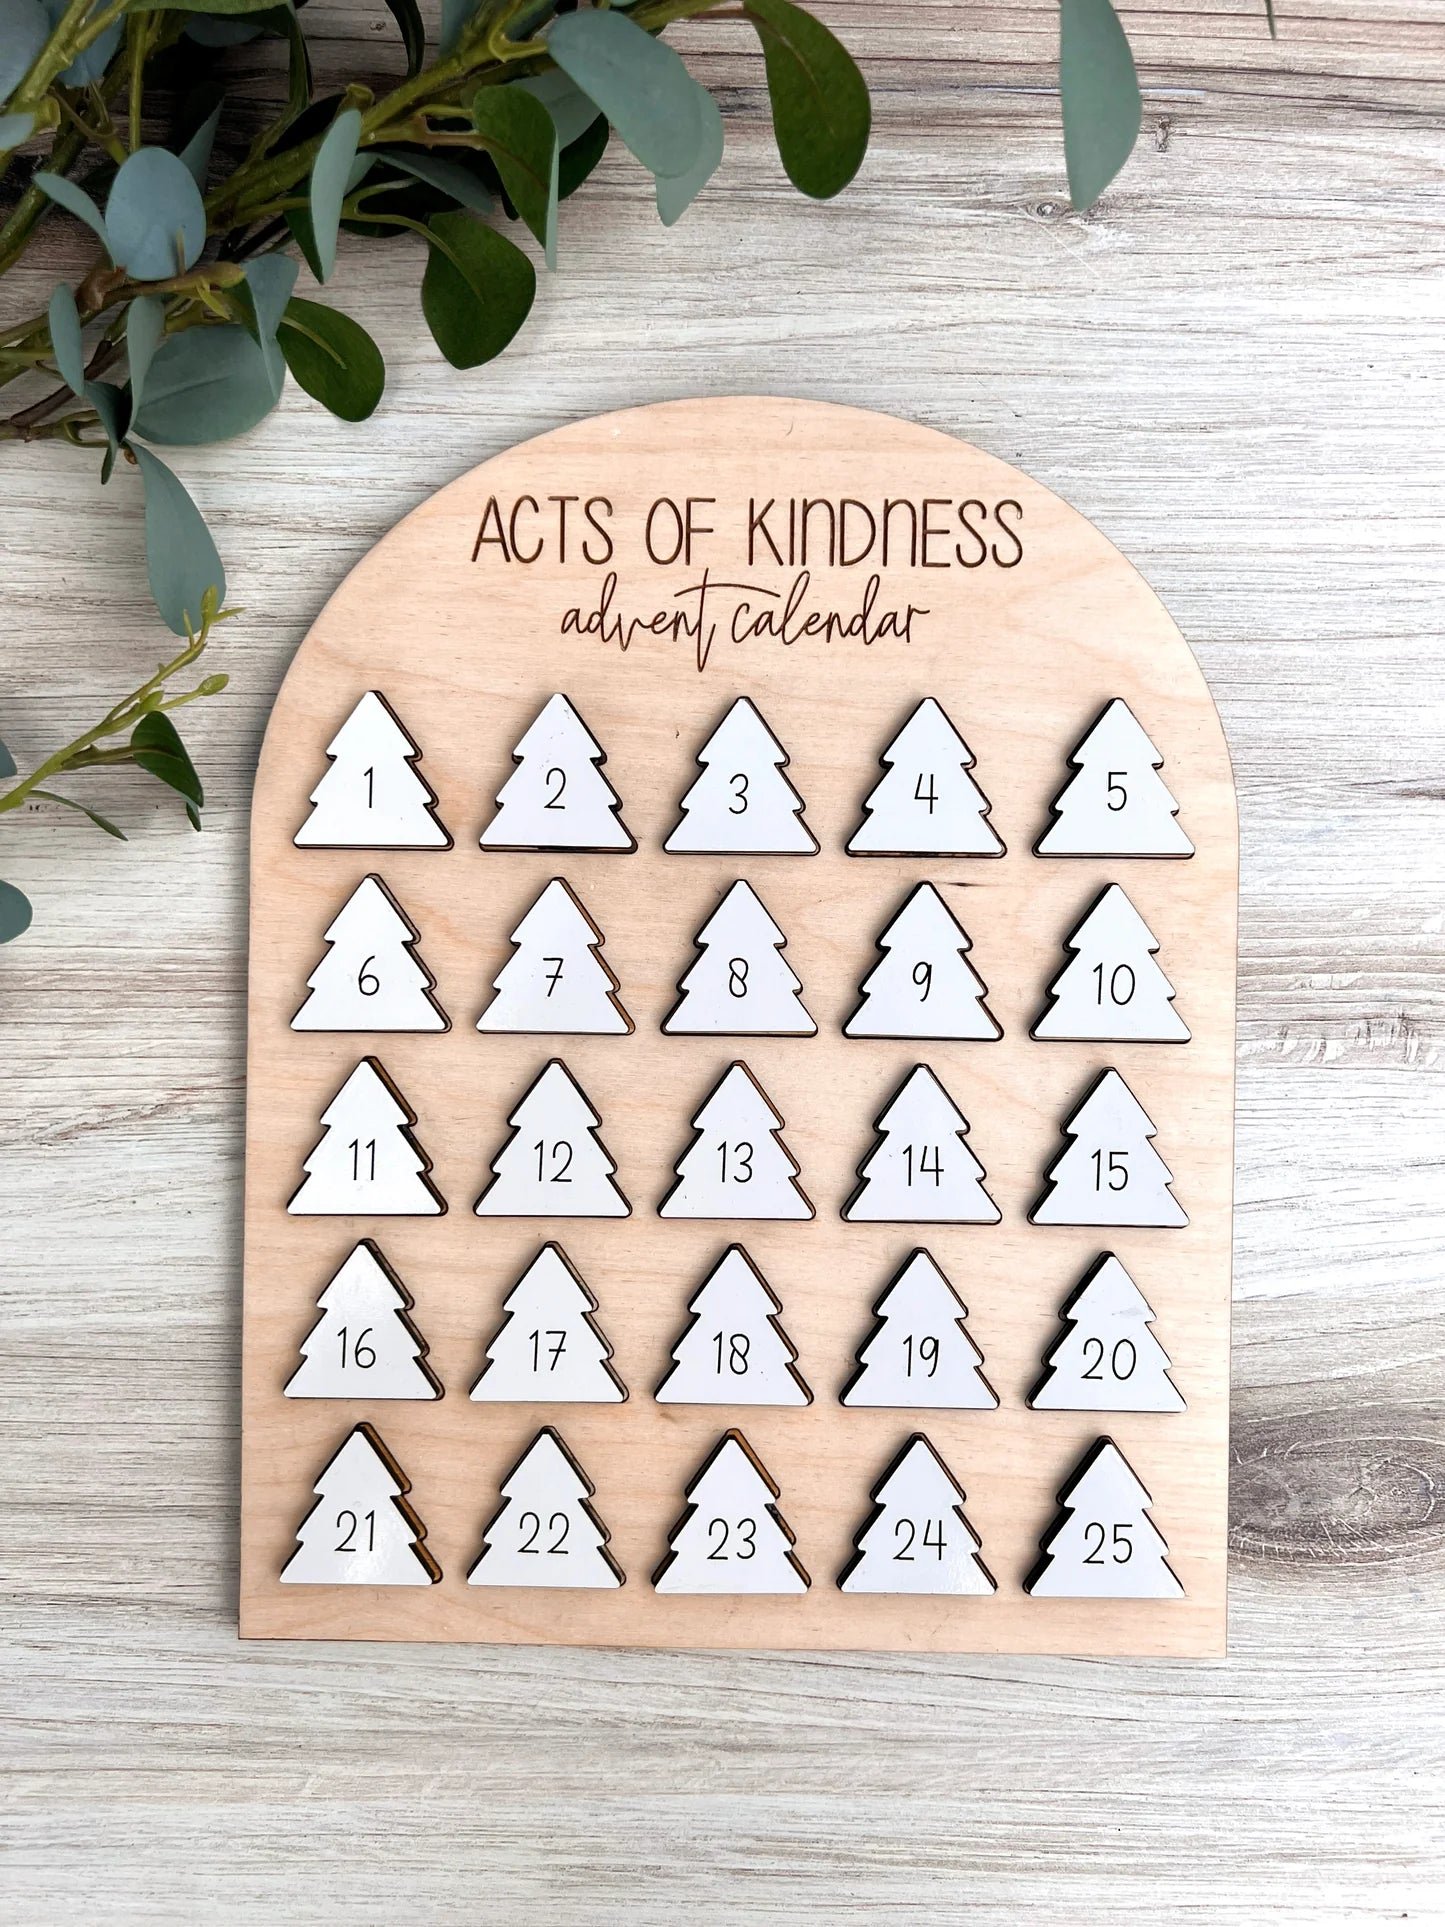 🔥Christmas Hot Sale - 49% OFF 2023 Oncandforal® 🎄✝Acts of Kindness Advent Calendar✝🎄